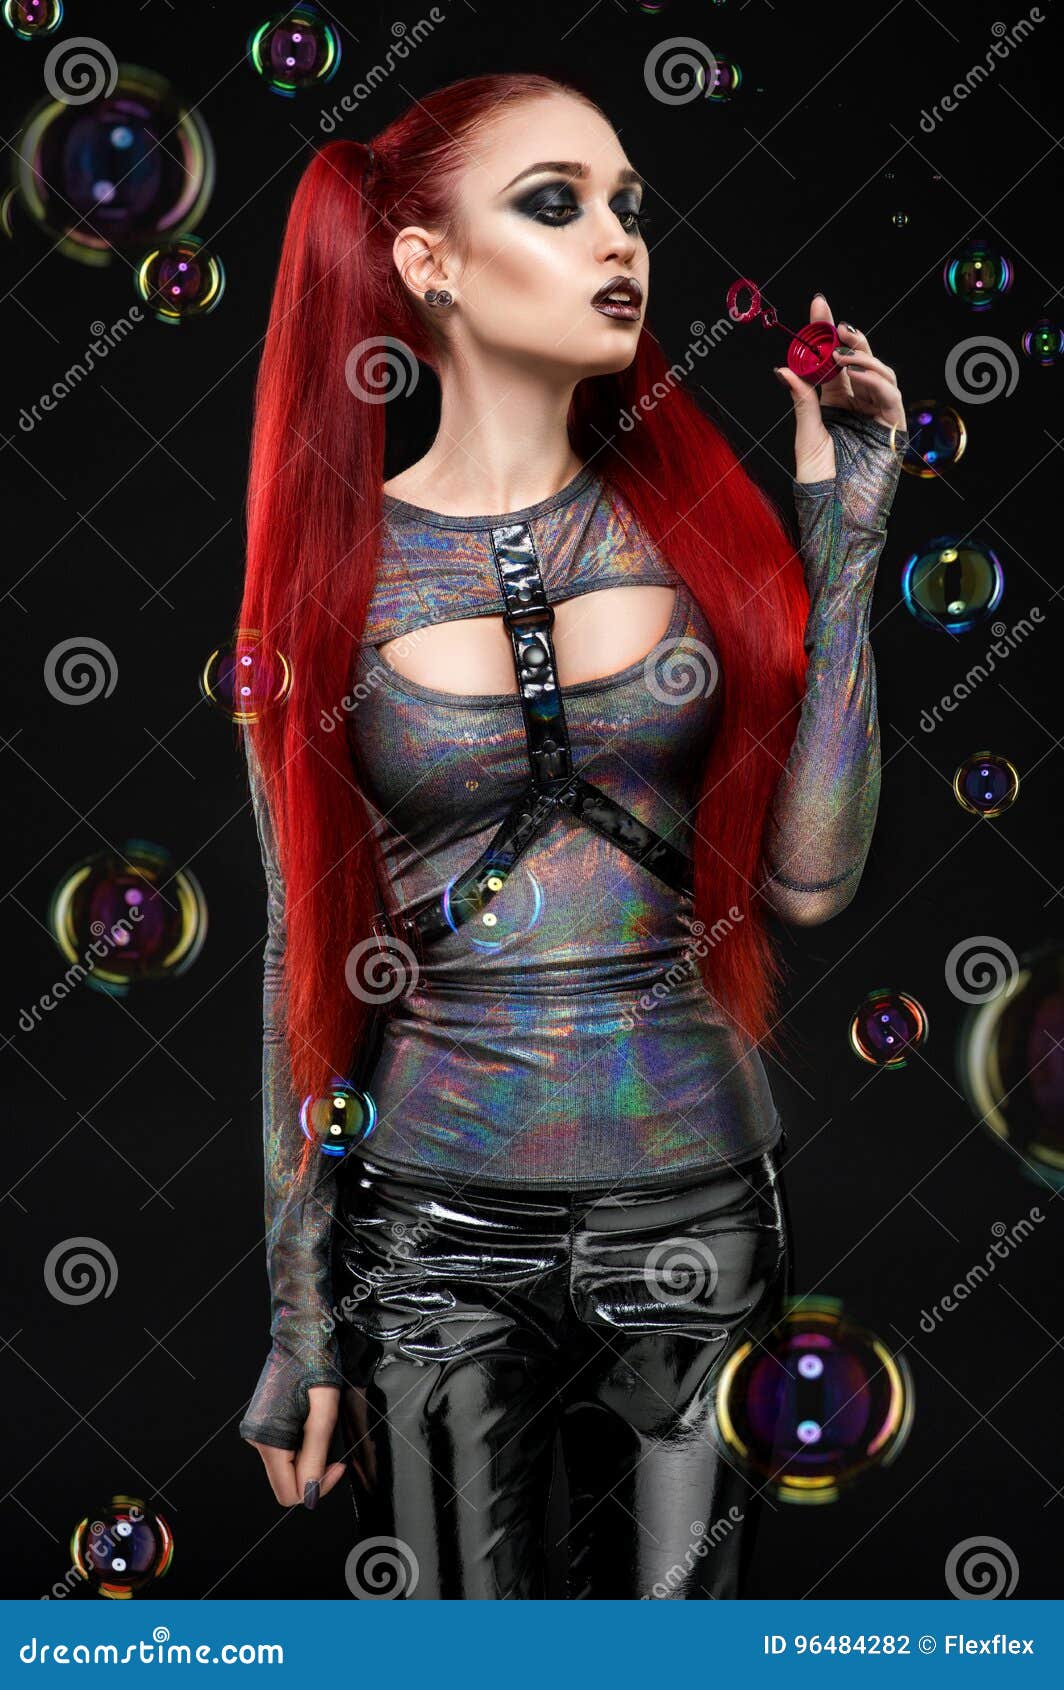 redhair model blowing air bubbles